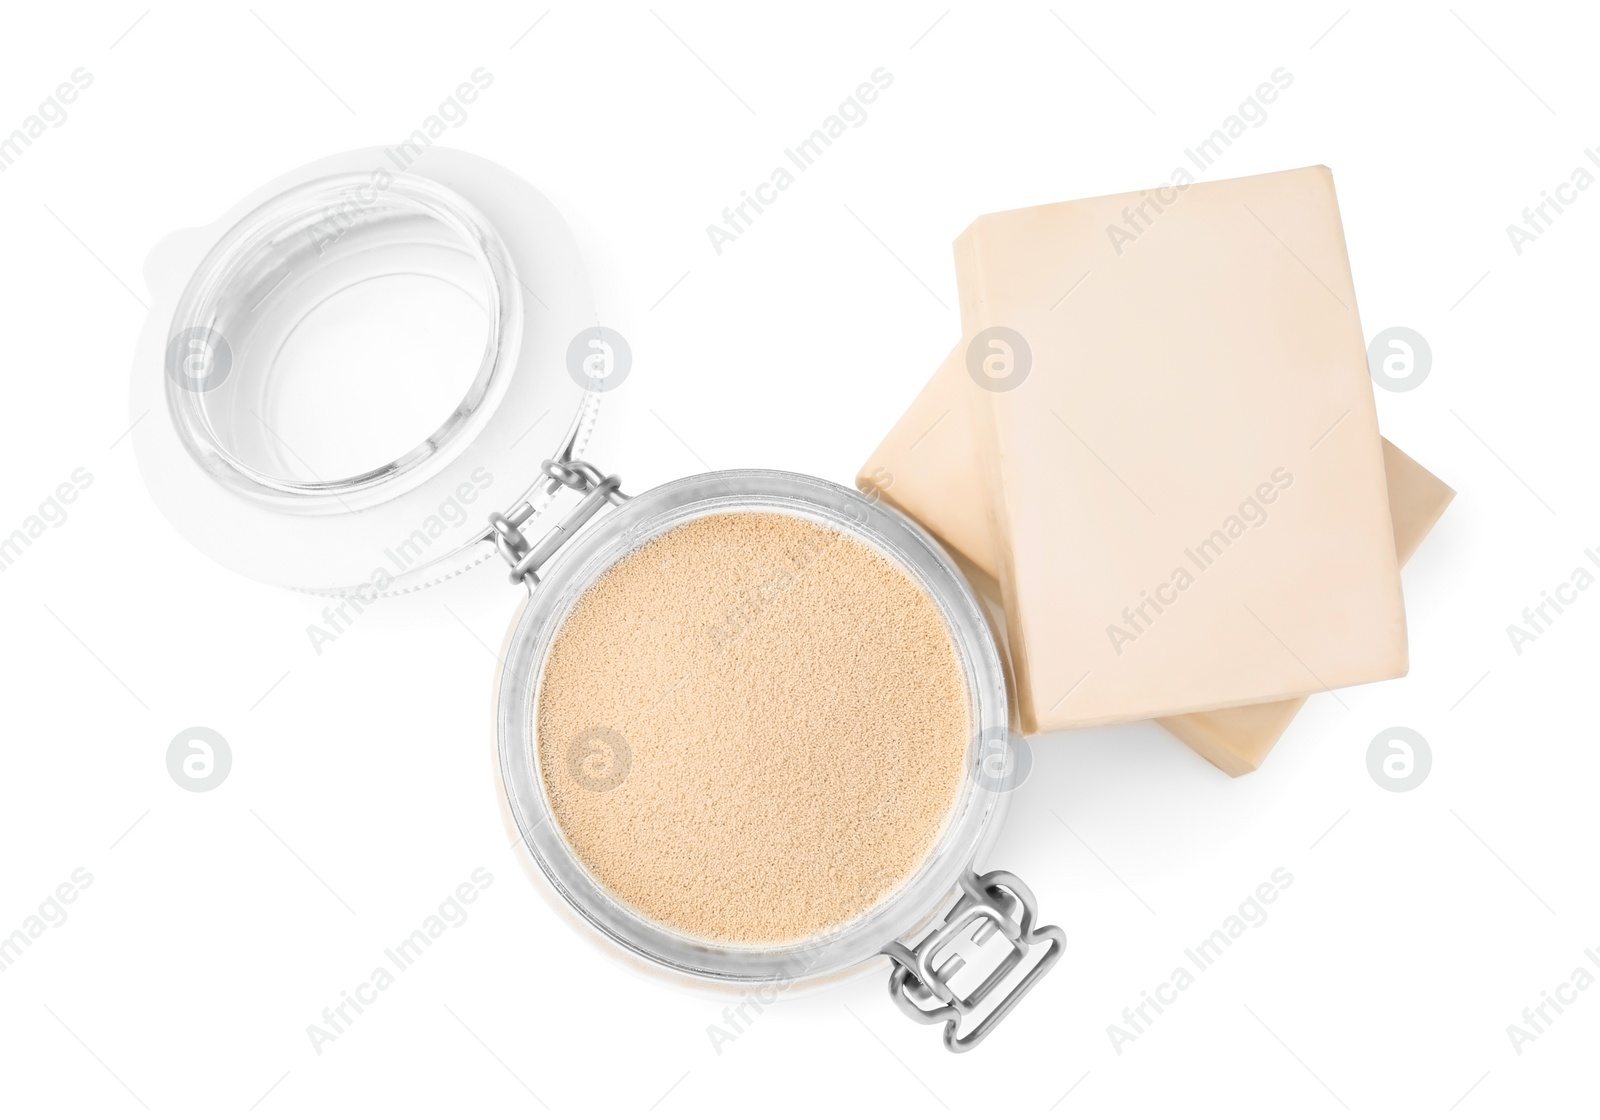 Photo of Compressed and granulated yeast on white background, top view